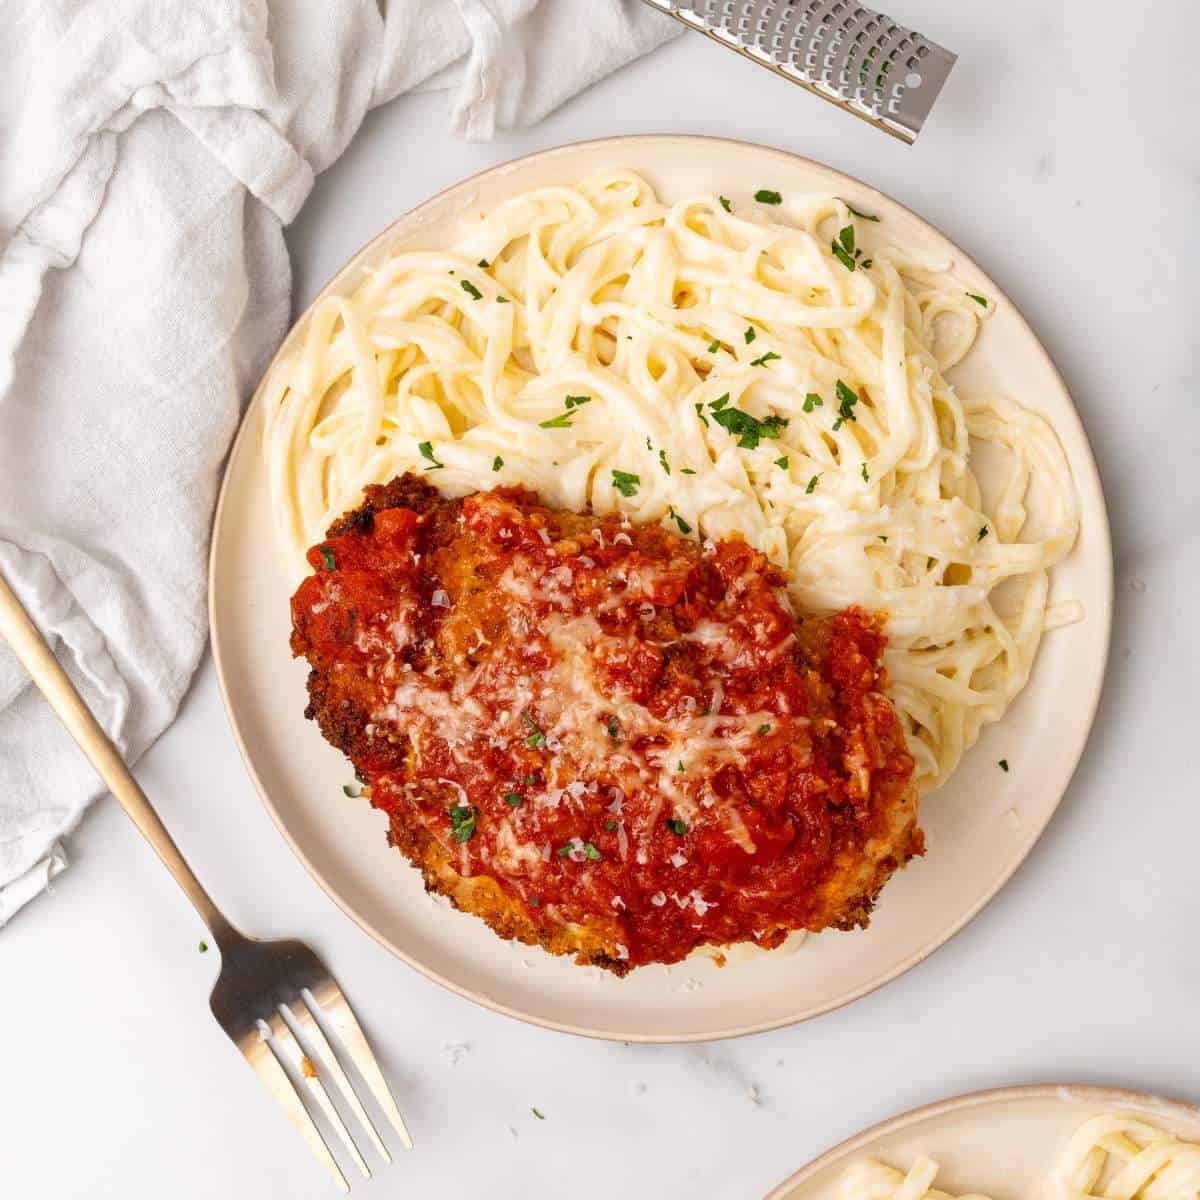 A plate of spaghetti topped with Alfredo sauce next to a breaded Chicken Parmesan cutlet with marinara sauce and grated cheese, garnished with parsley.